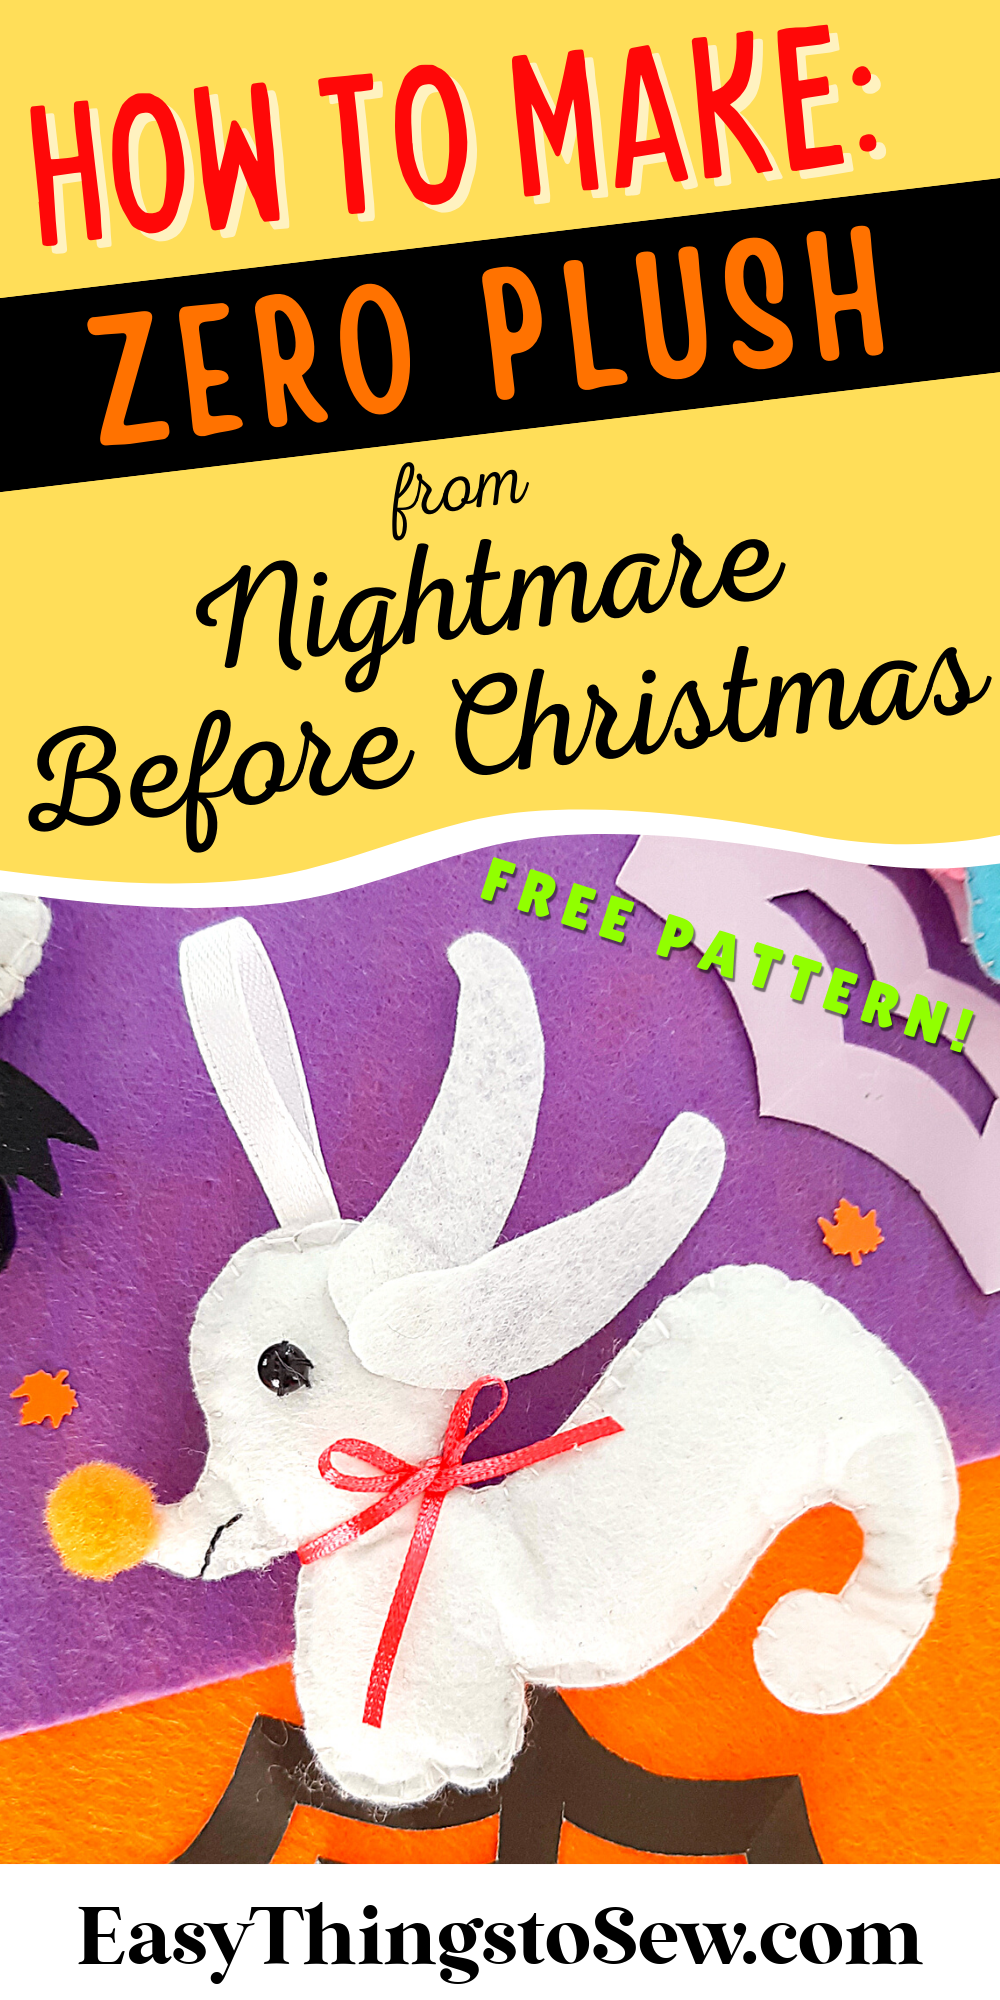 Instructional image showing steps on how to make a Zero plush from "Nightmare Before Christmas" with a free pattern. The Zero plush features white fabric, a red ribbon collar, and an orange nose.